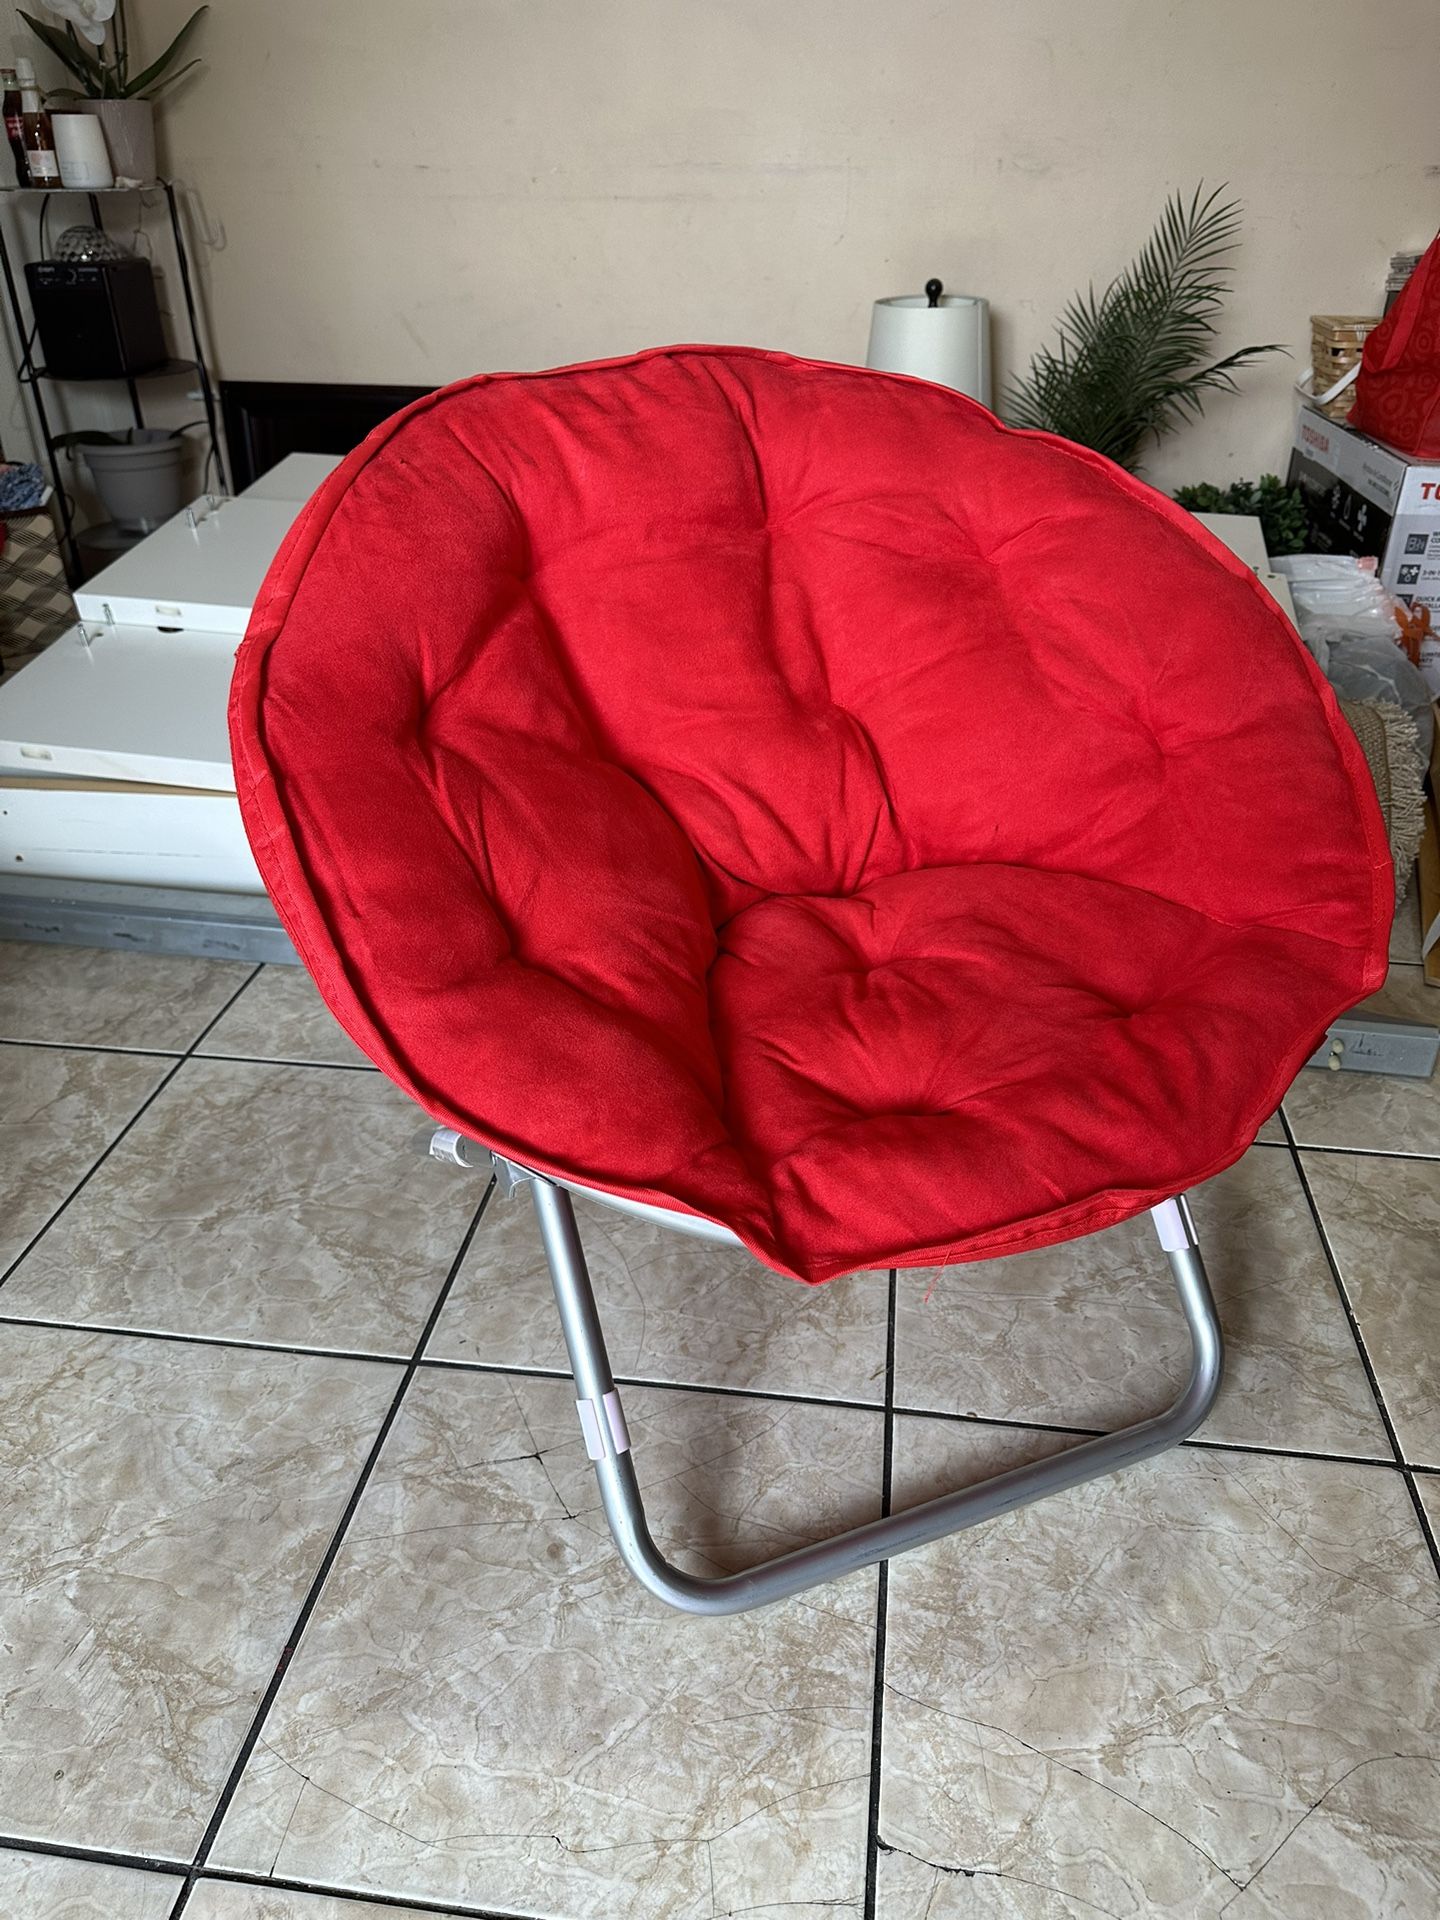 Red saucer chair